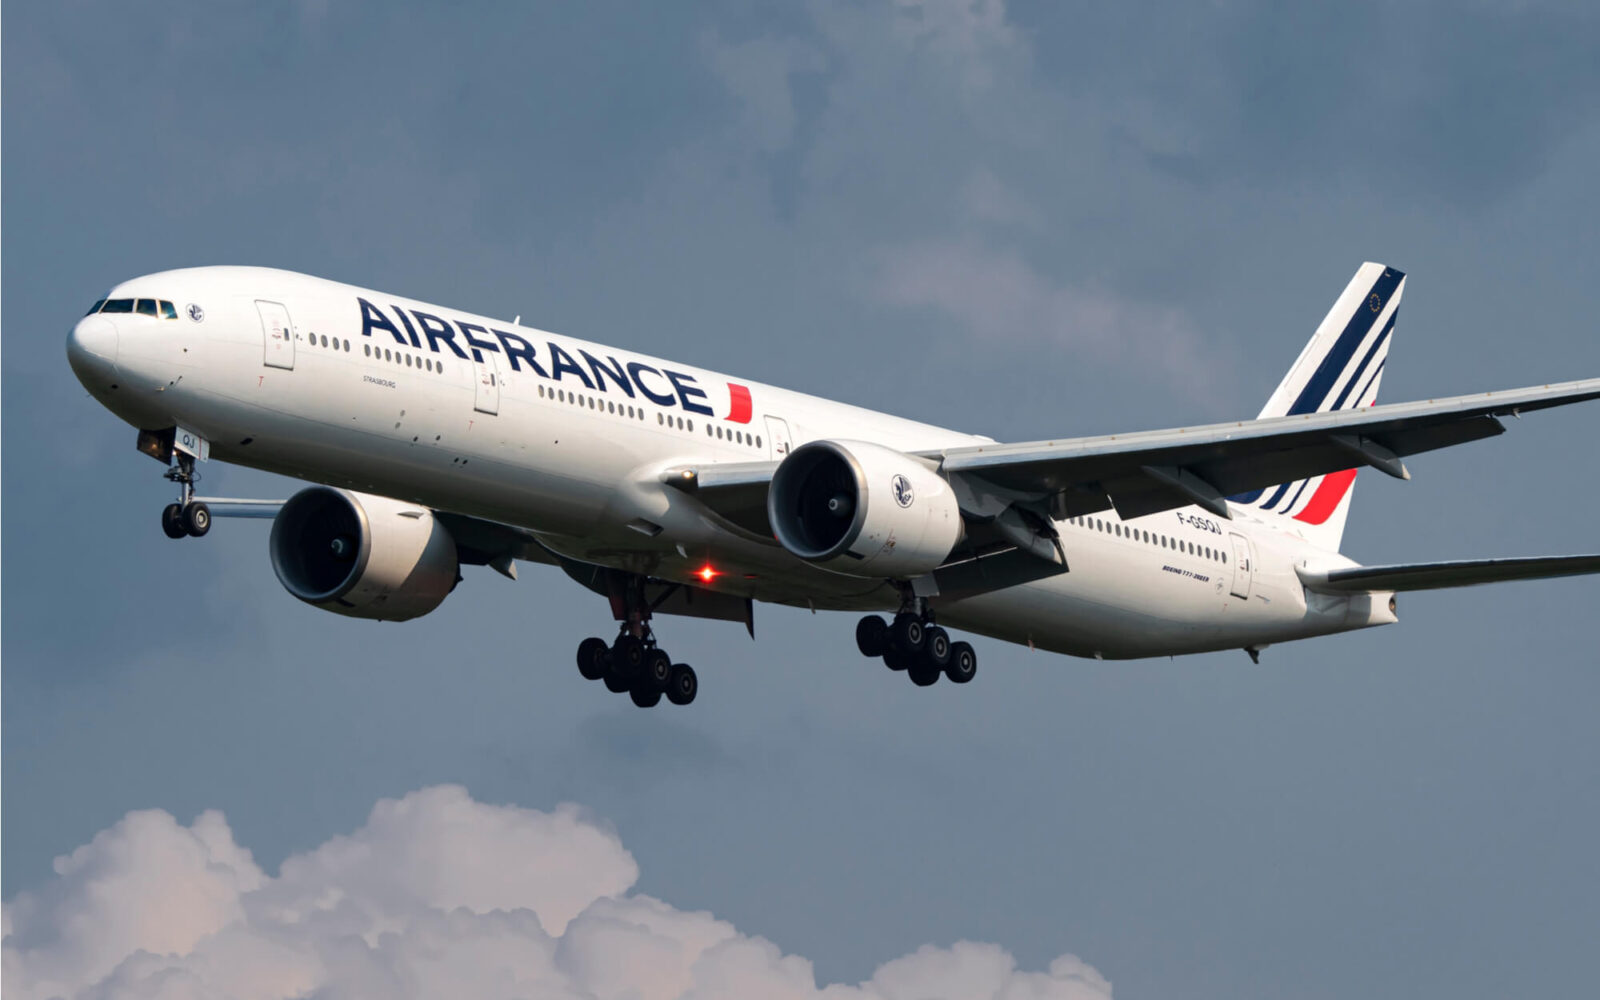 Confusion over the controls: Update on the Air France 777 approach ...